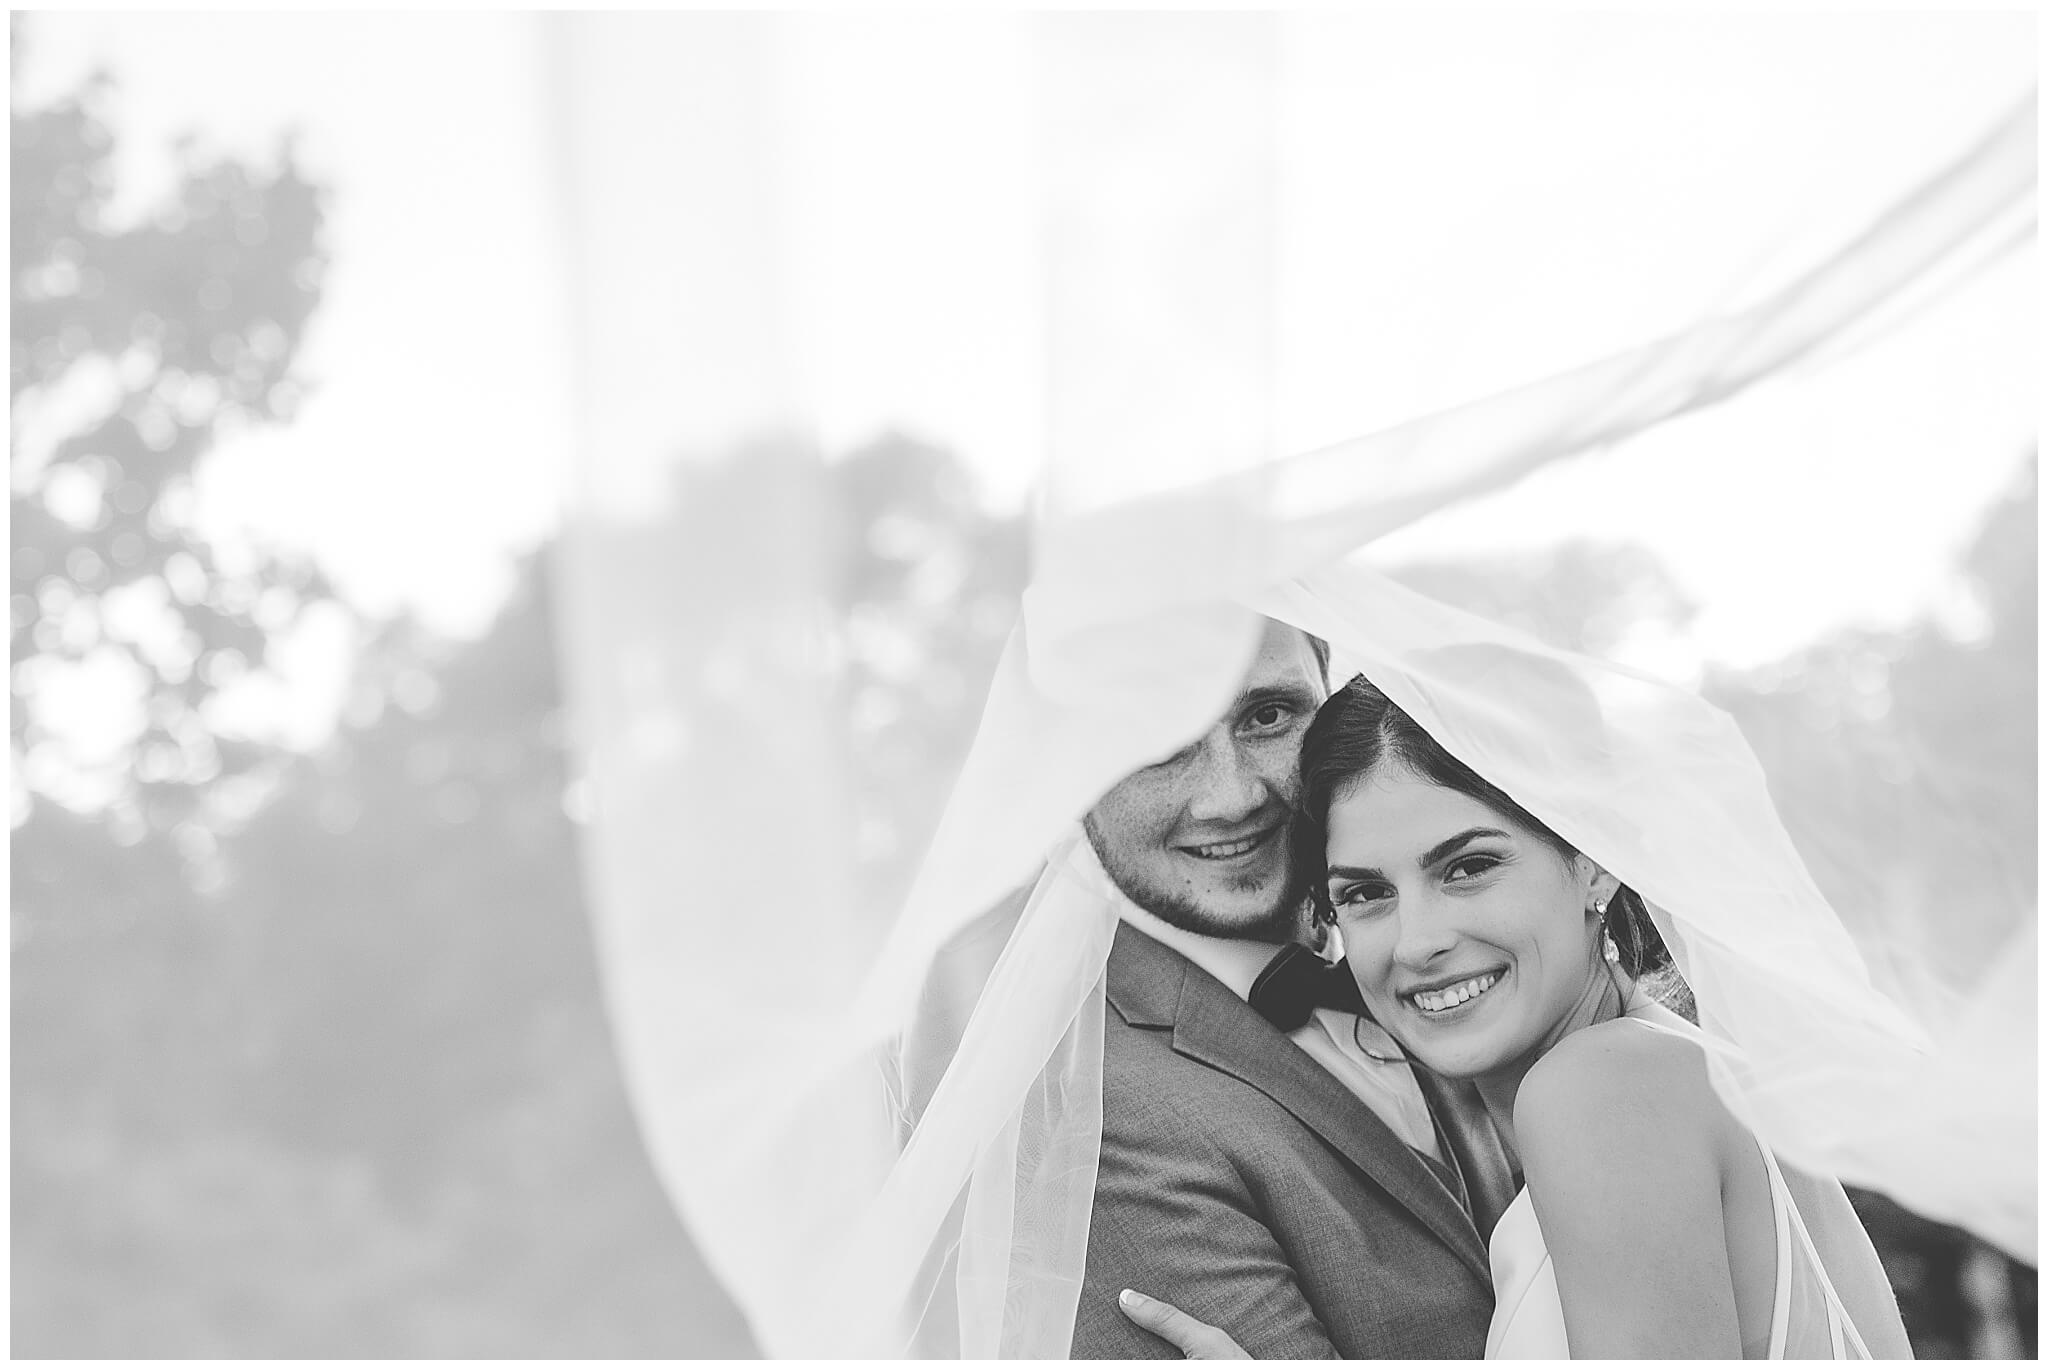 a playful black and white photo of a smiling bride and groom under a veil